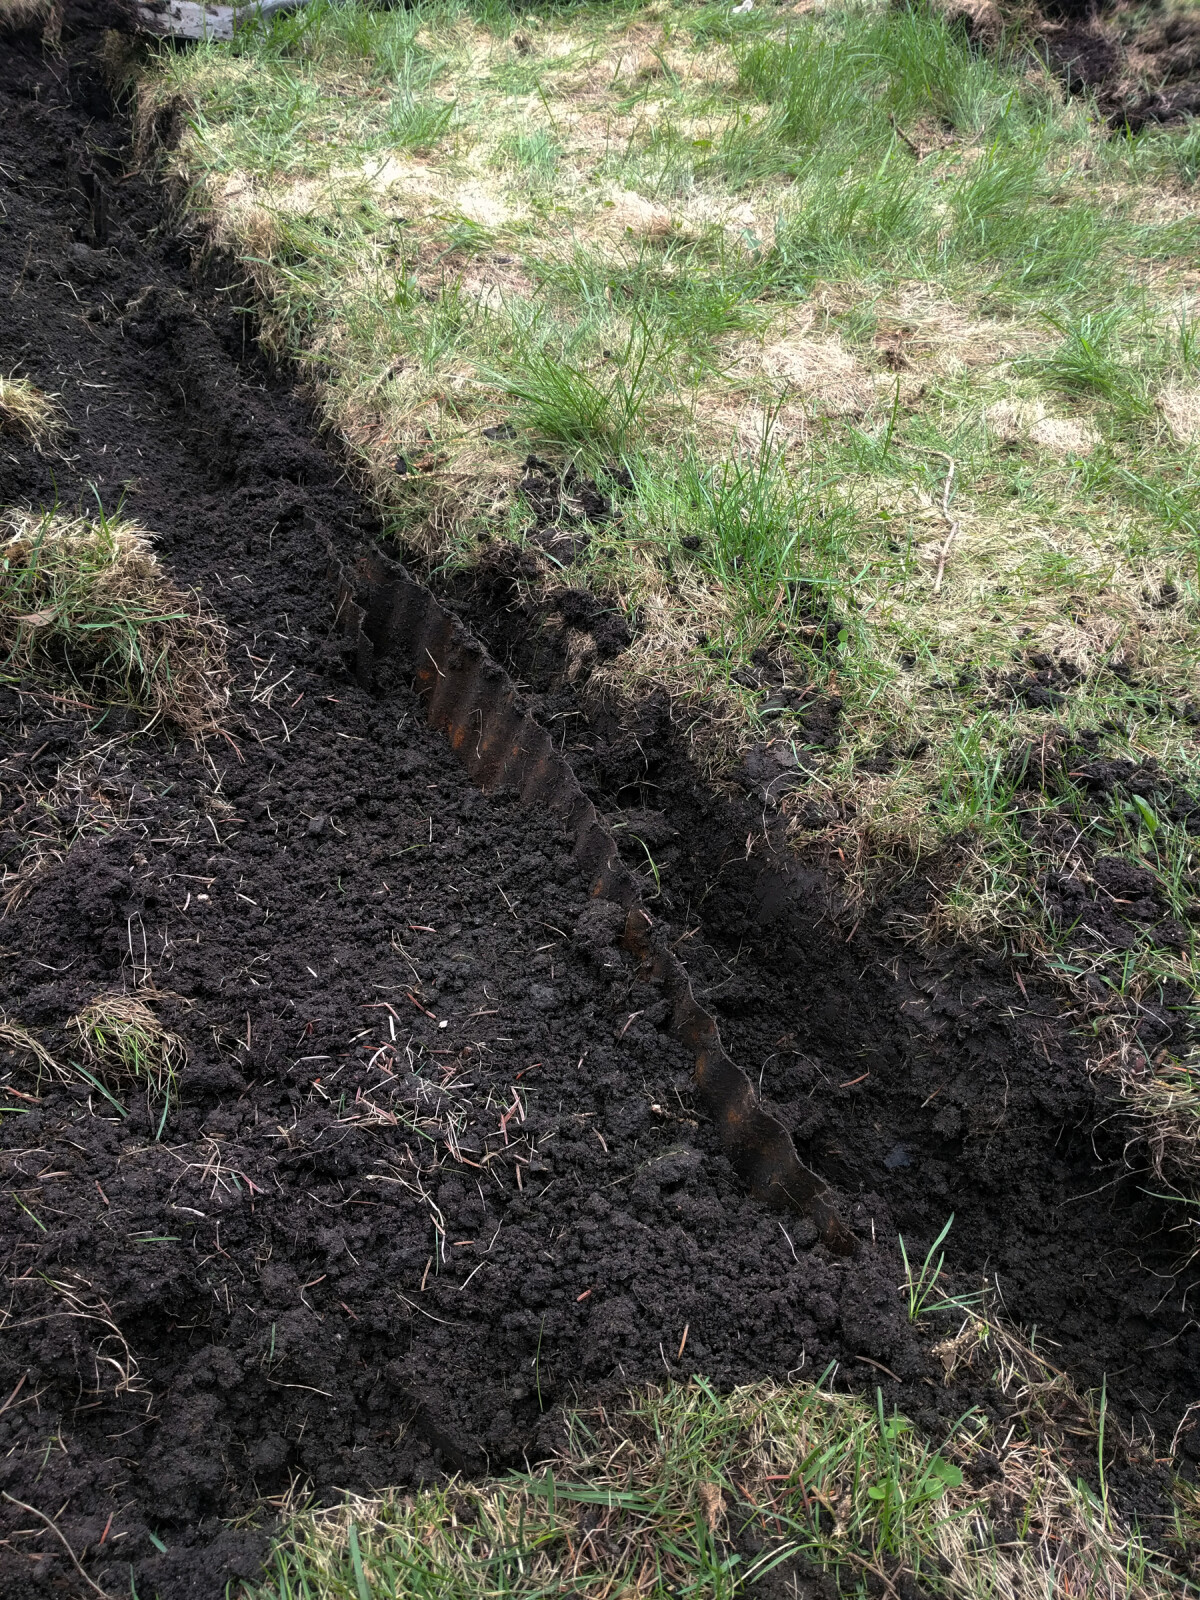 Old rusty edging dug out of the ground